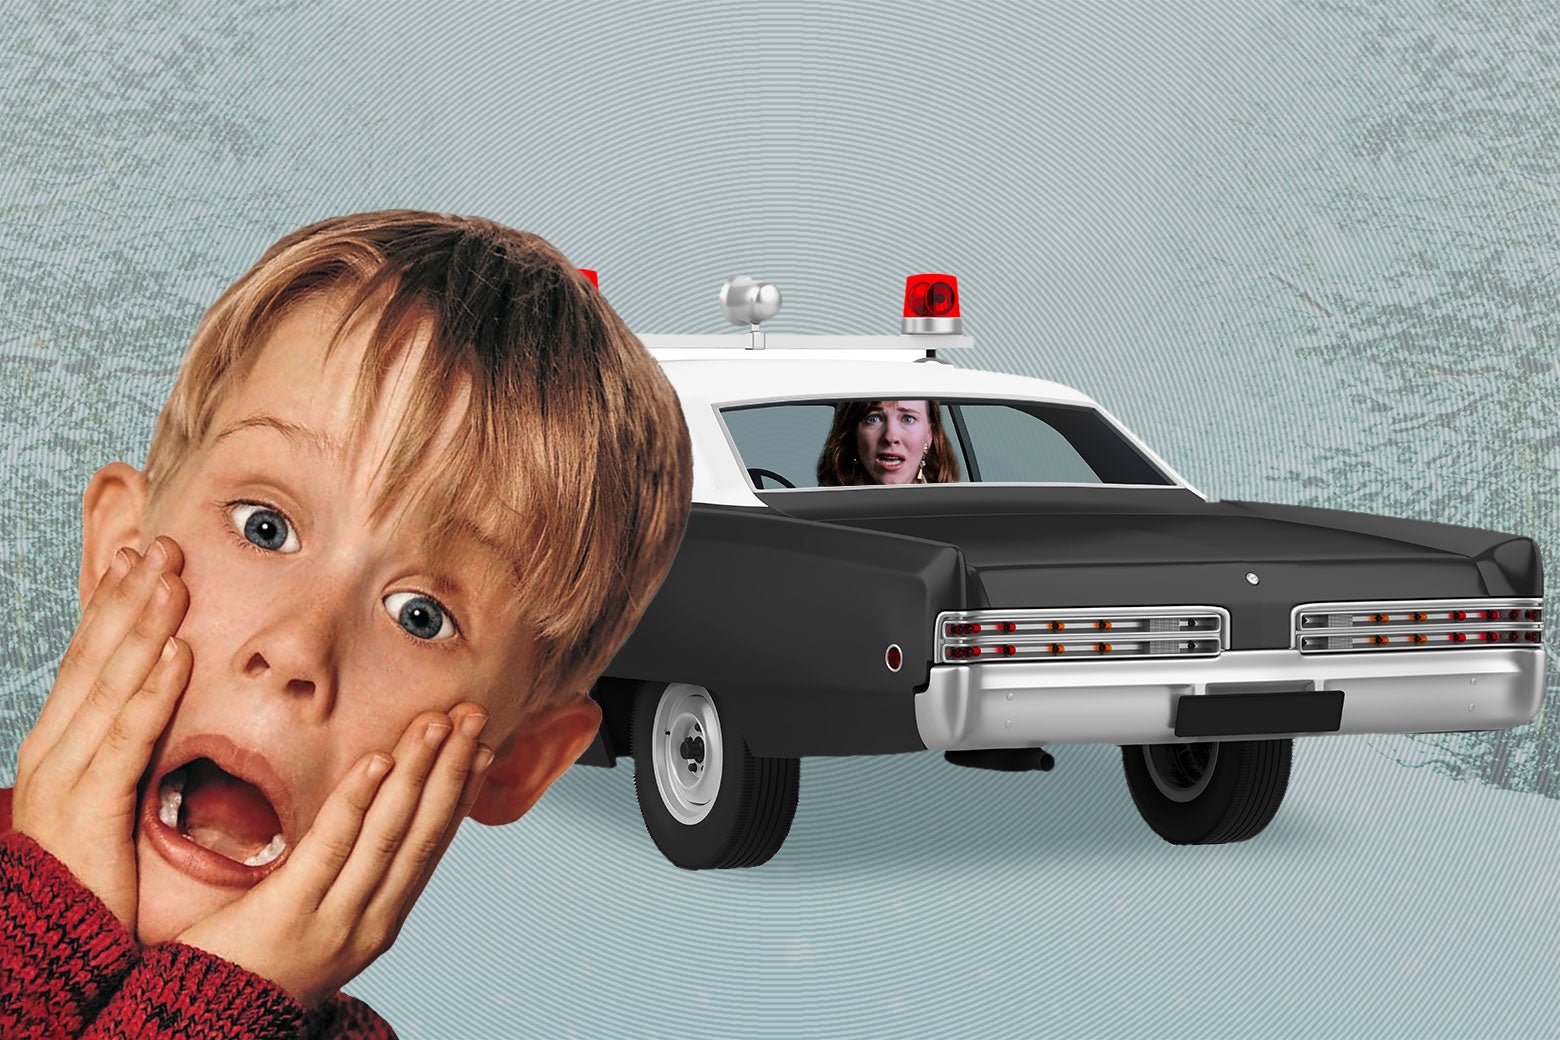 Macaulay Culkin in Home Alone with the classic hands-on-his-face movie poster pose to the side, with the mom, Kate McCallister, in a police car. 